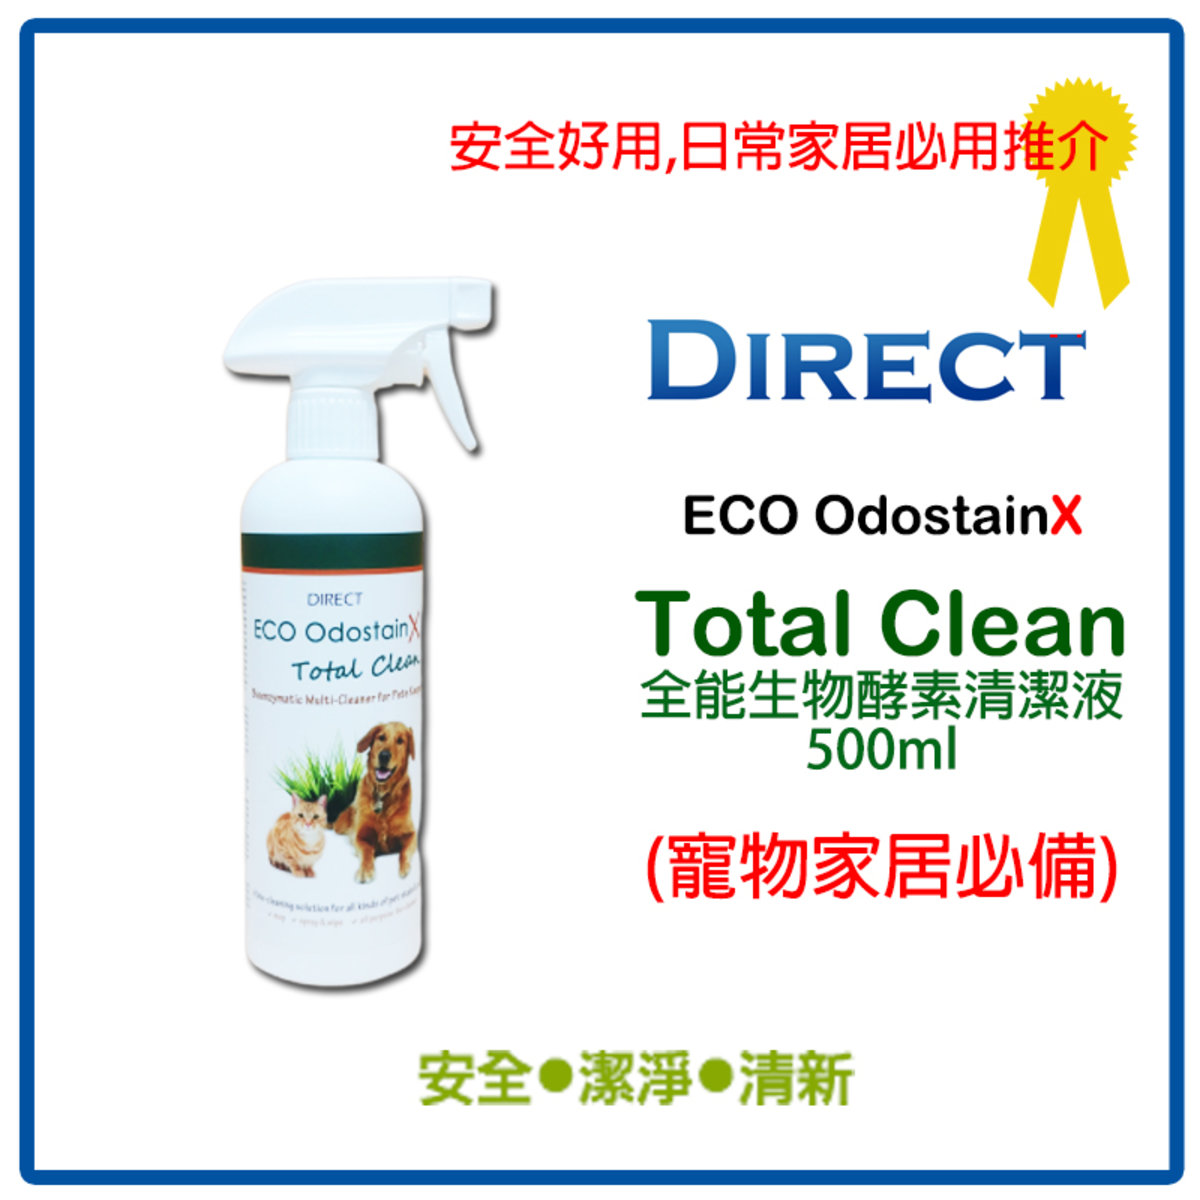 ECO OdostainX TOTAL CLEAN 500ml